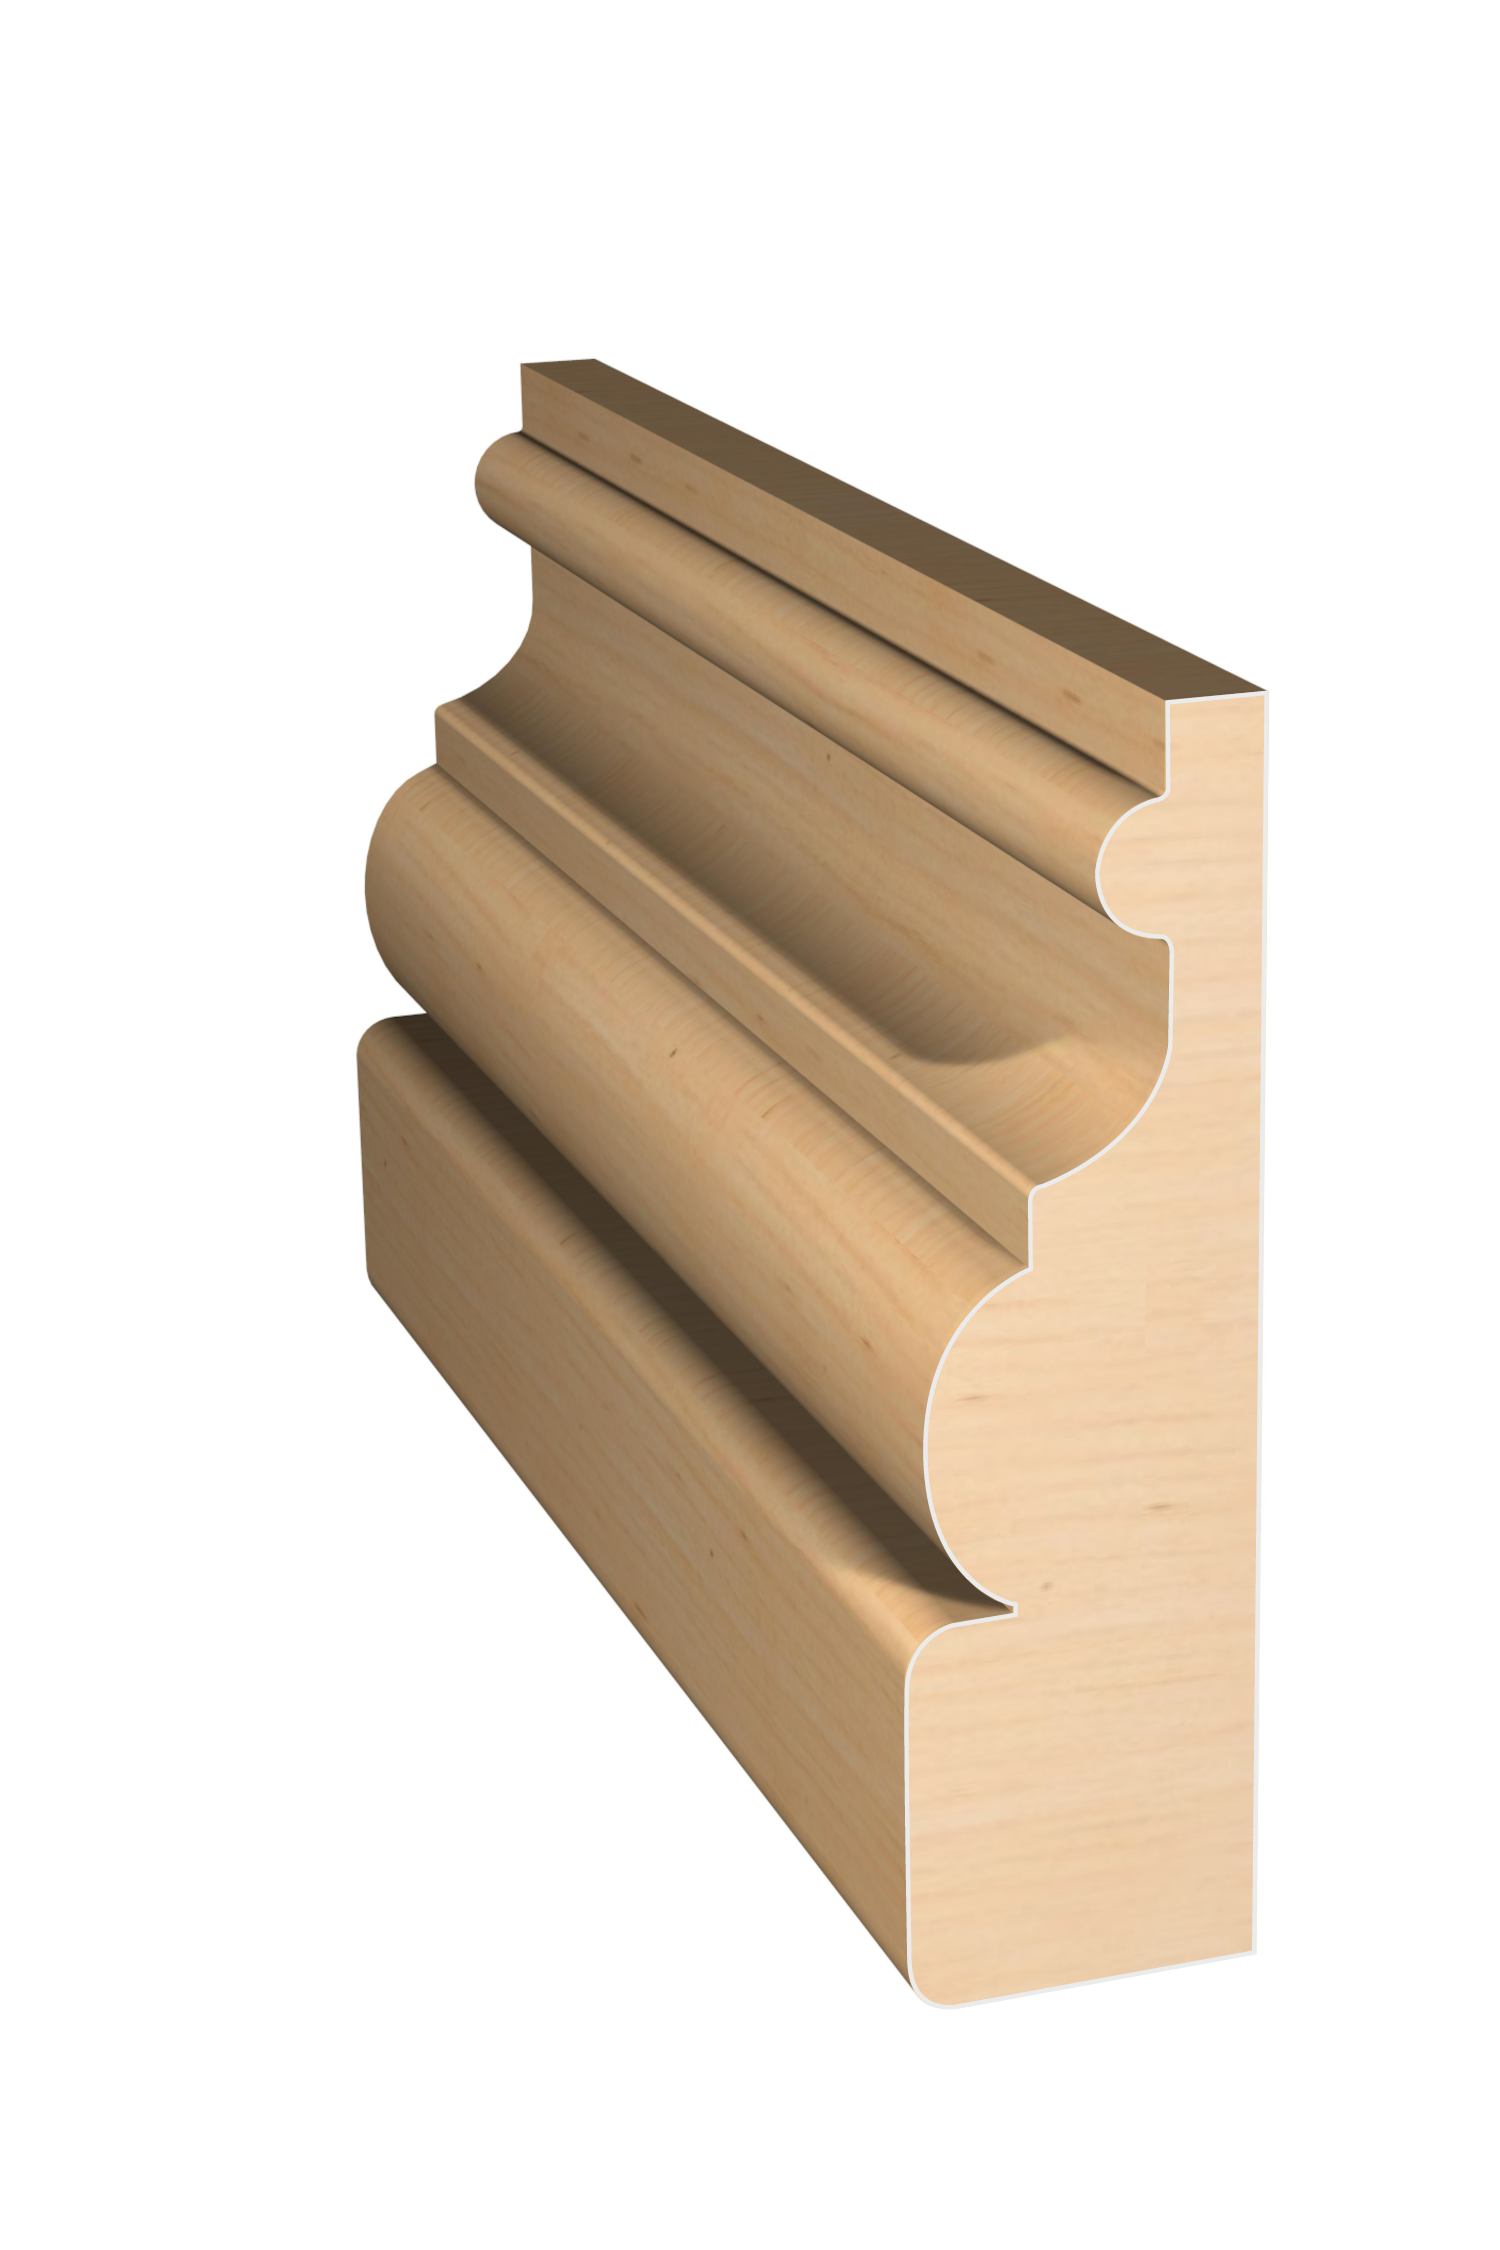 Three dimensional rendering of custom casing wood molding CAPL3121 made by Public Lumber Company in Detroit.